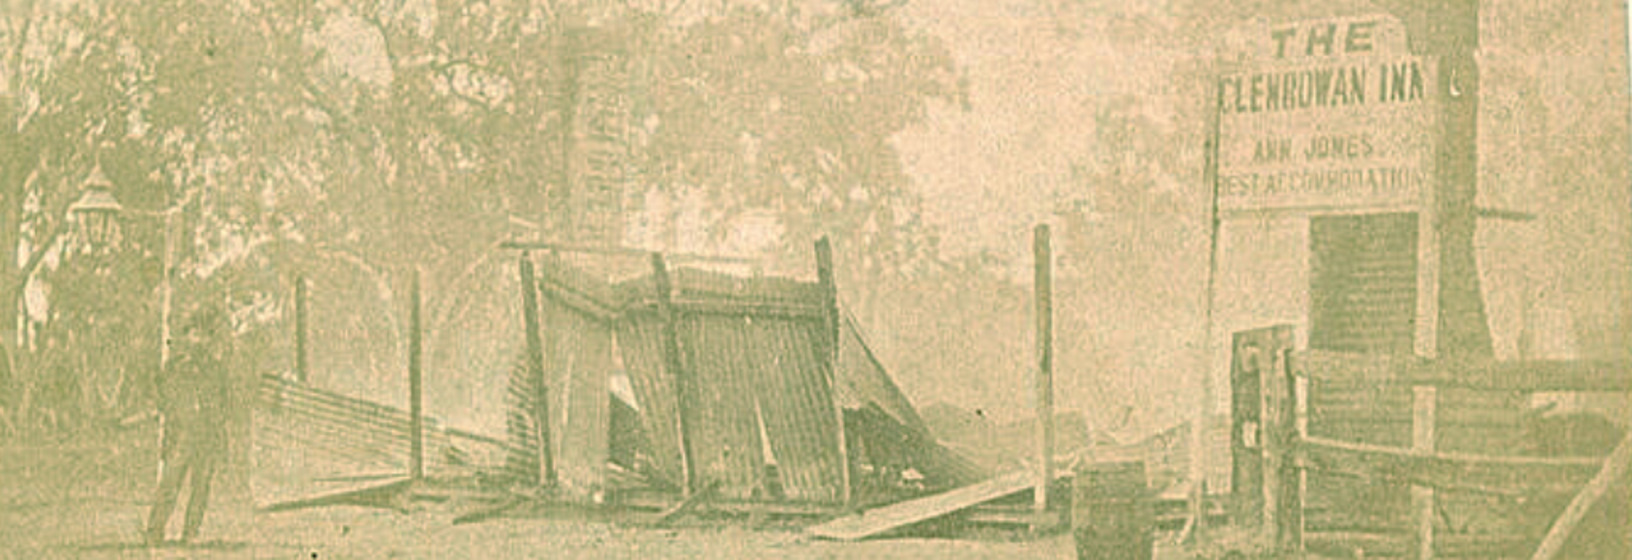 early image, burnt remains of a wooden building